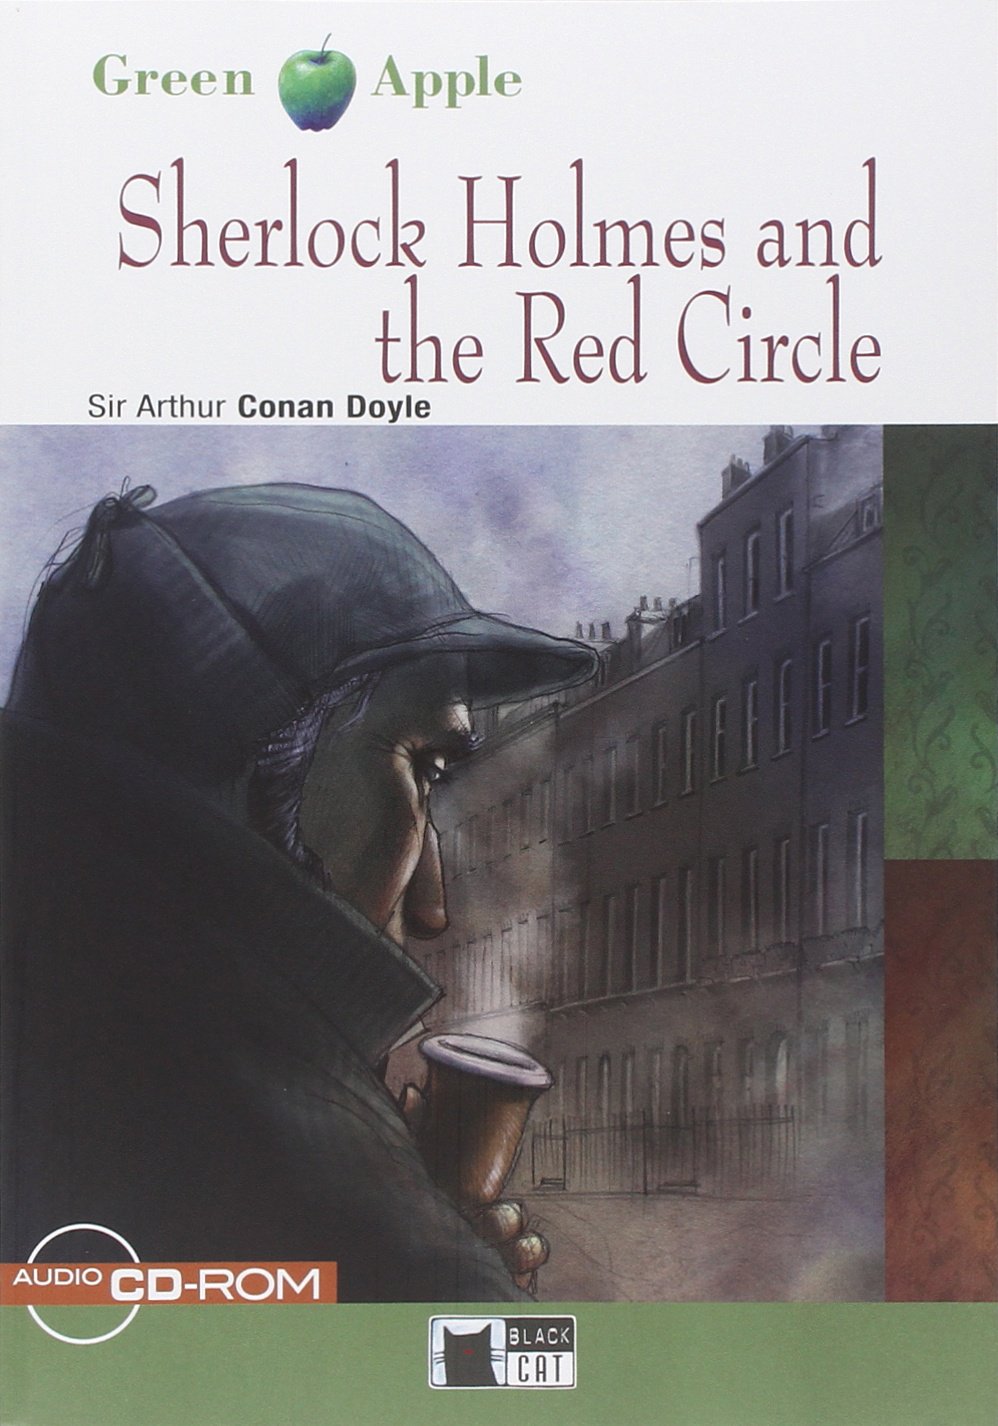 SHERLOCK HOLMES AND THE RED CIRCLE (GREEN APPLE,STEP1, A2) Book+ AudioCD+CD-ROM